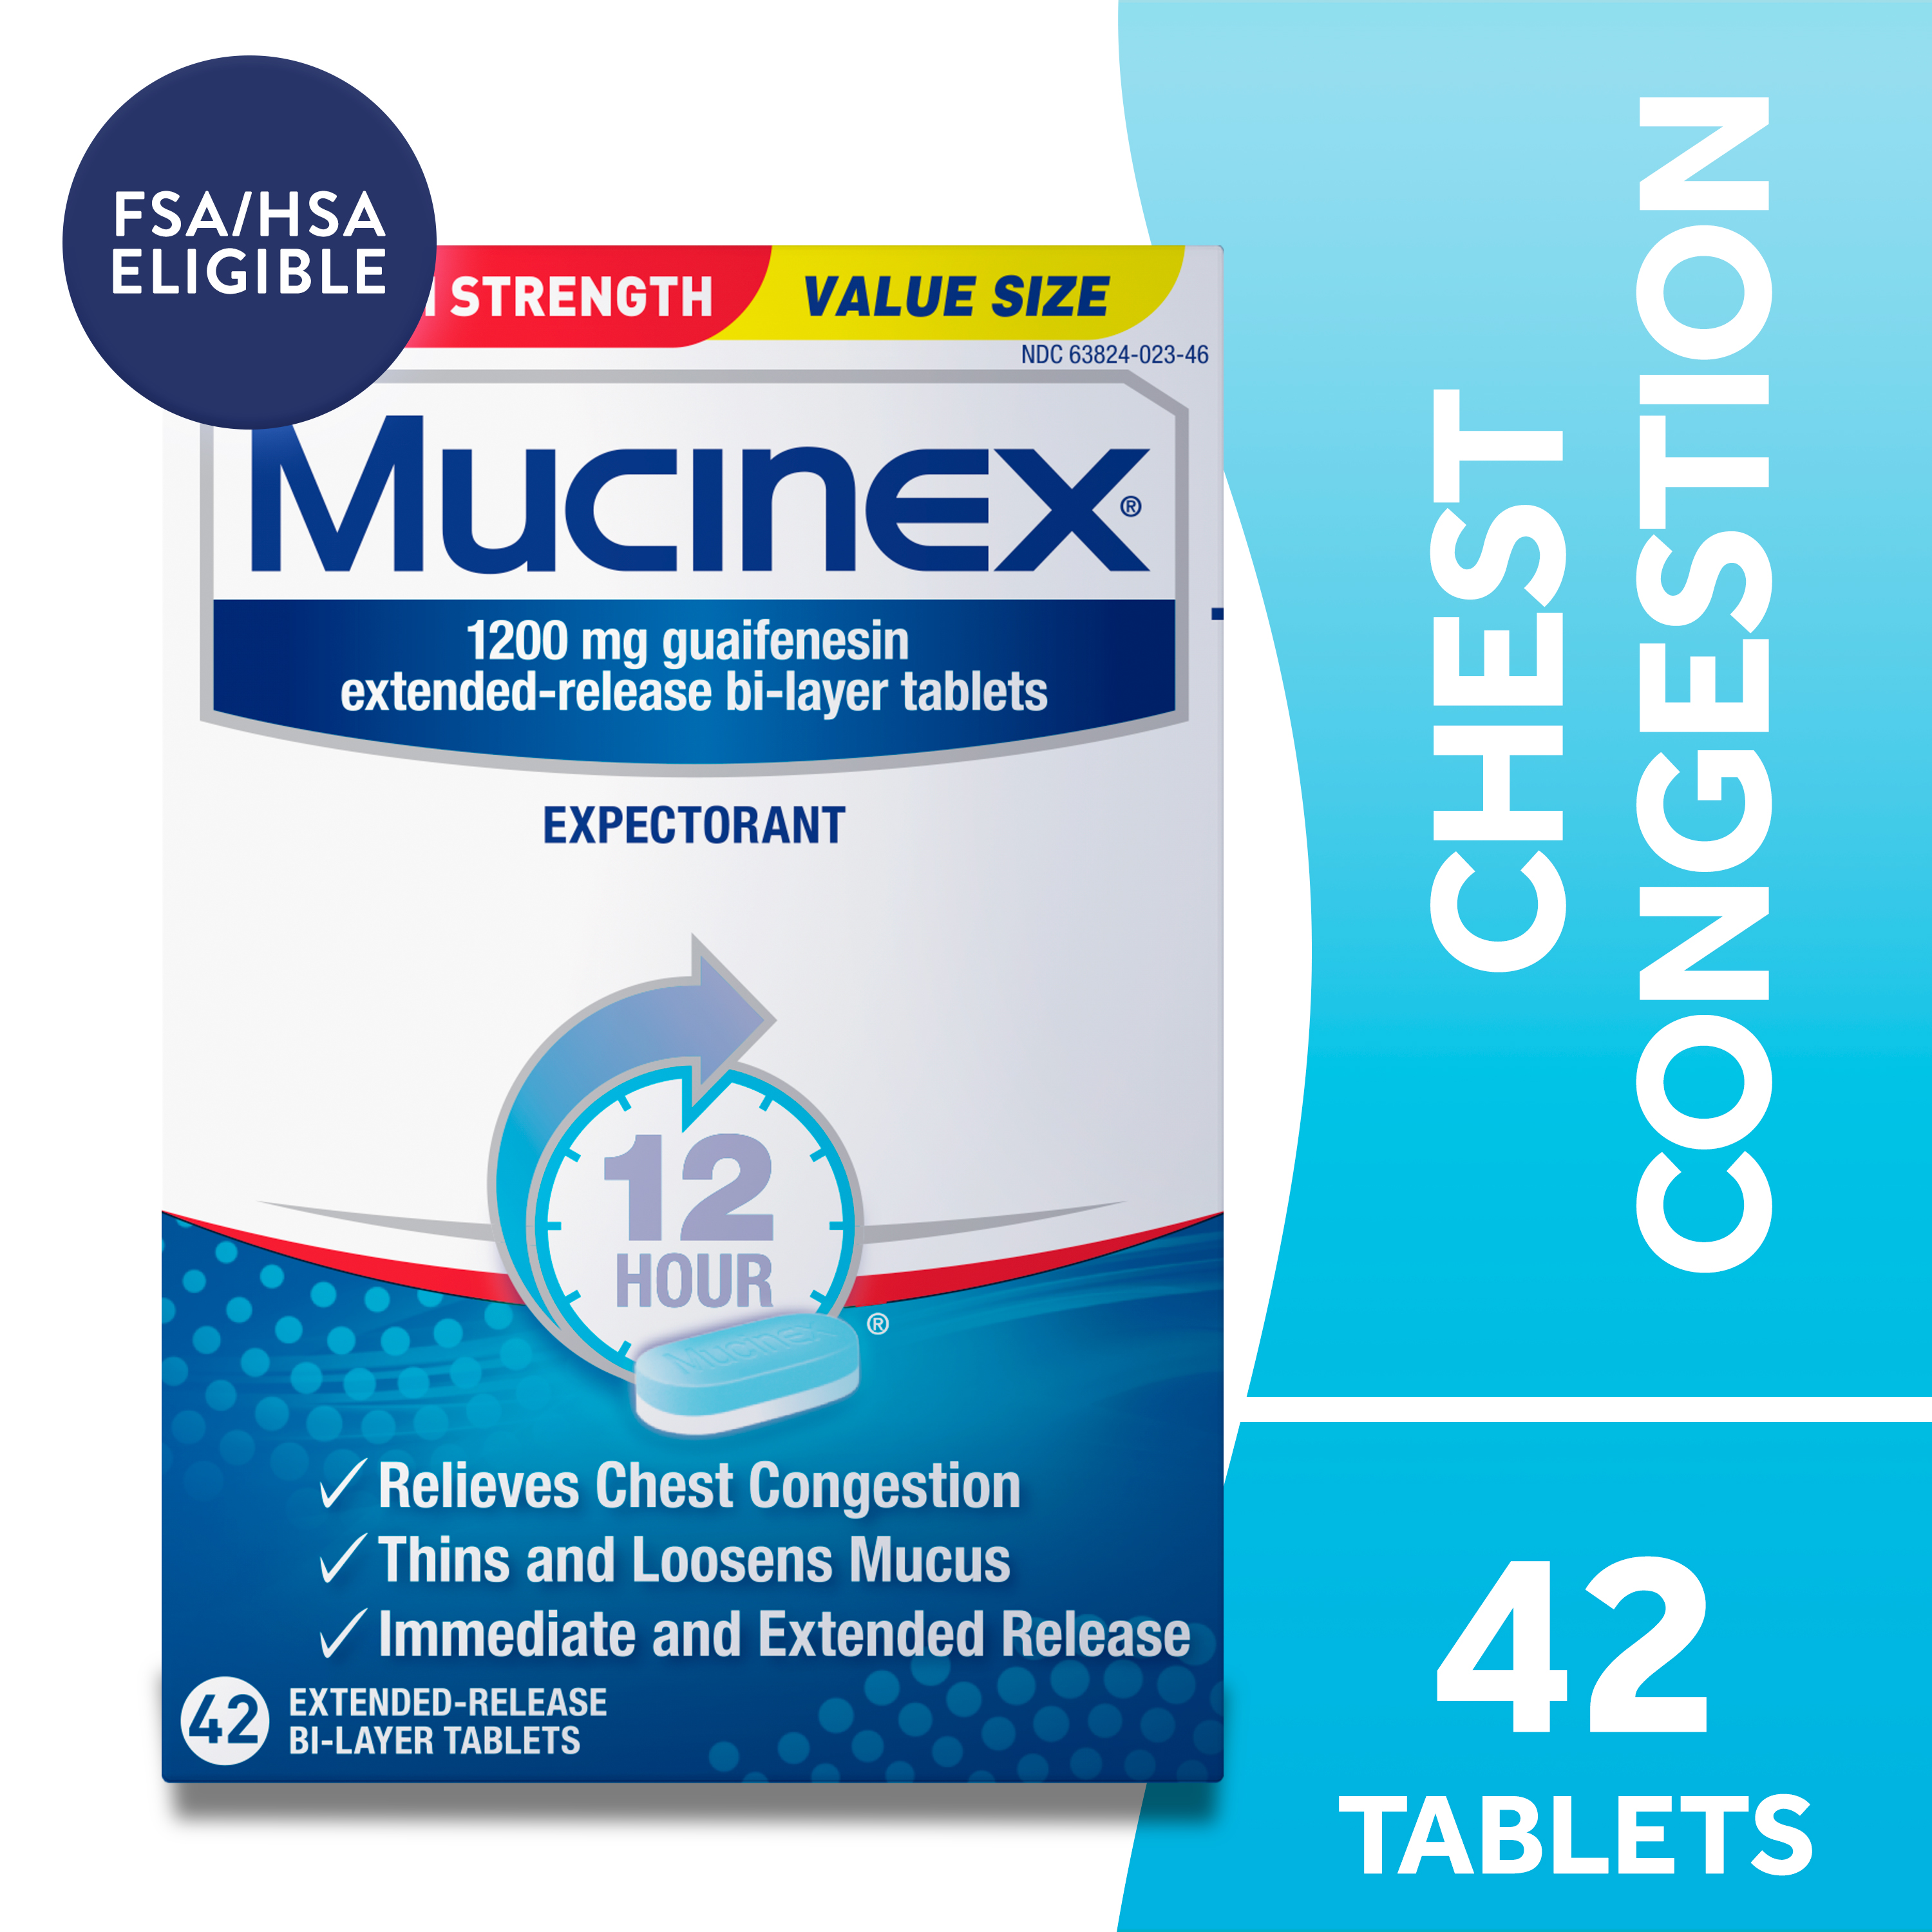 Mucinex 12 Hour Relief, Maximum Strength Chest Congestion and Cough Medicine, 42 Tablets - image 1 of 14